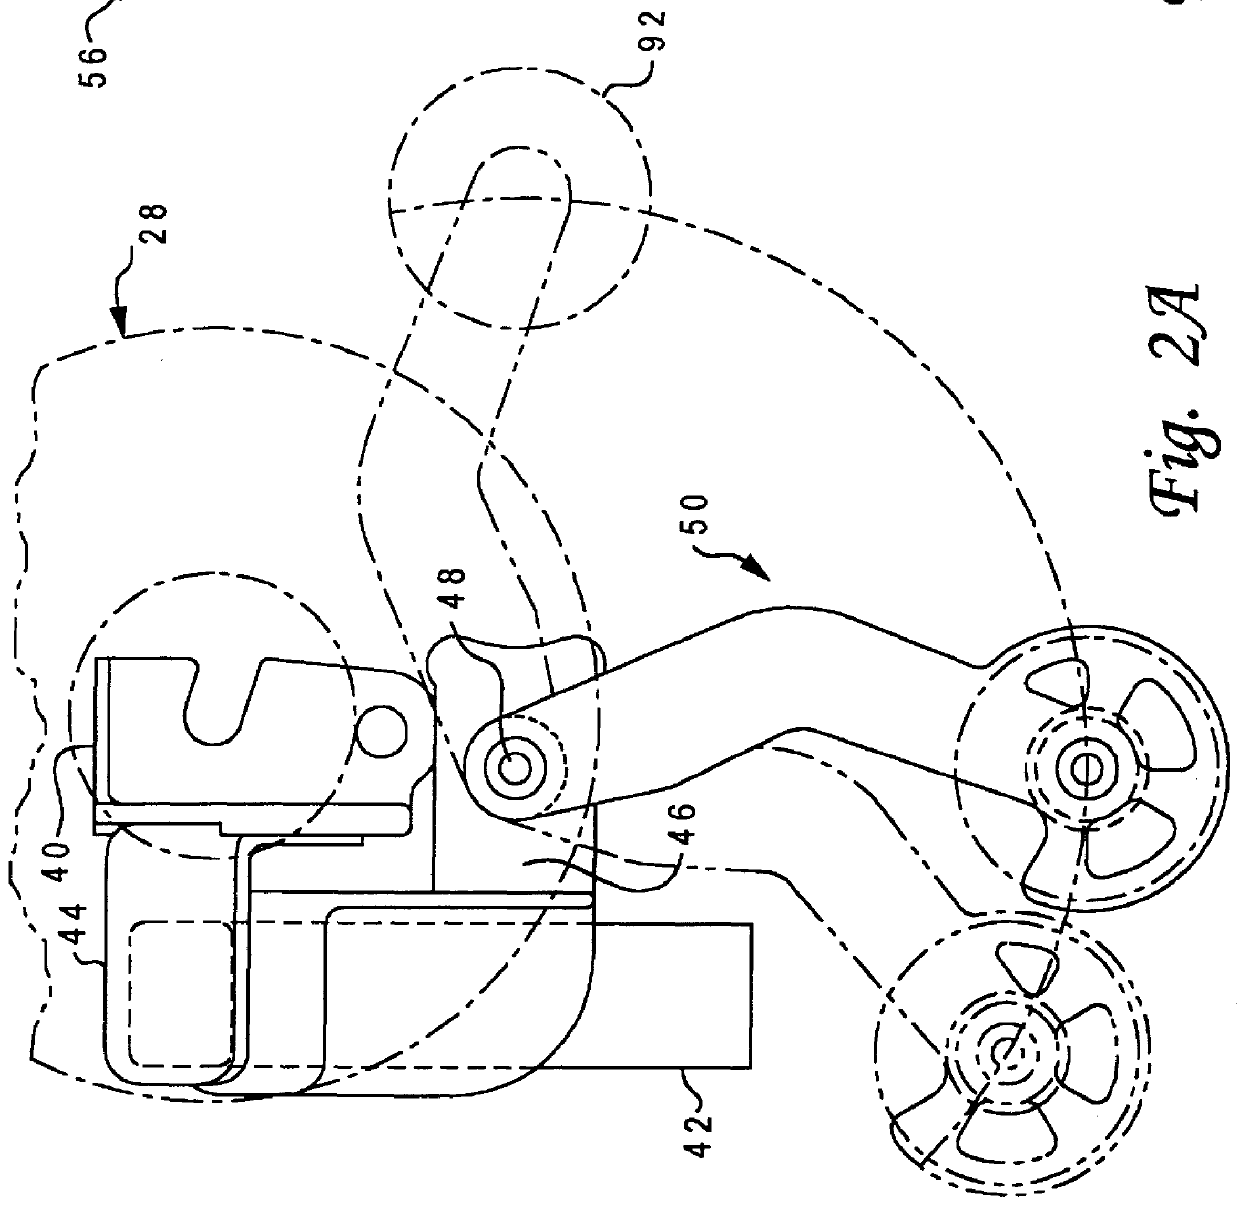 Hydraulically-operated bicycle shifting and braking systems